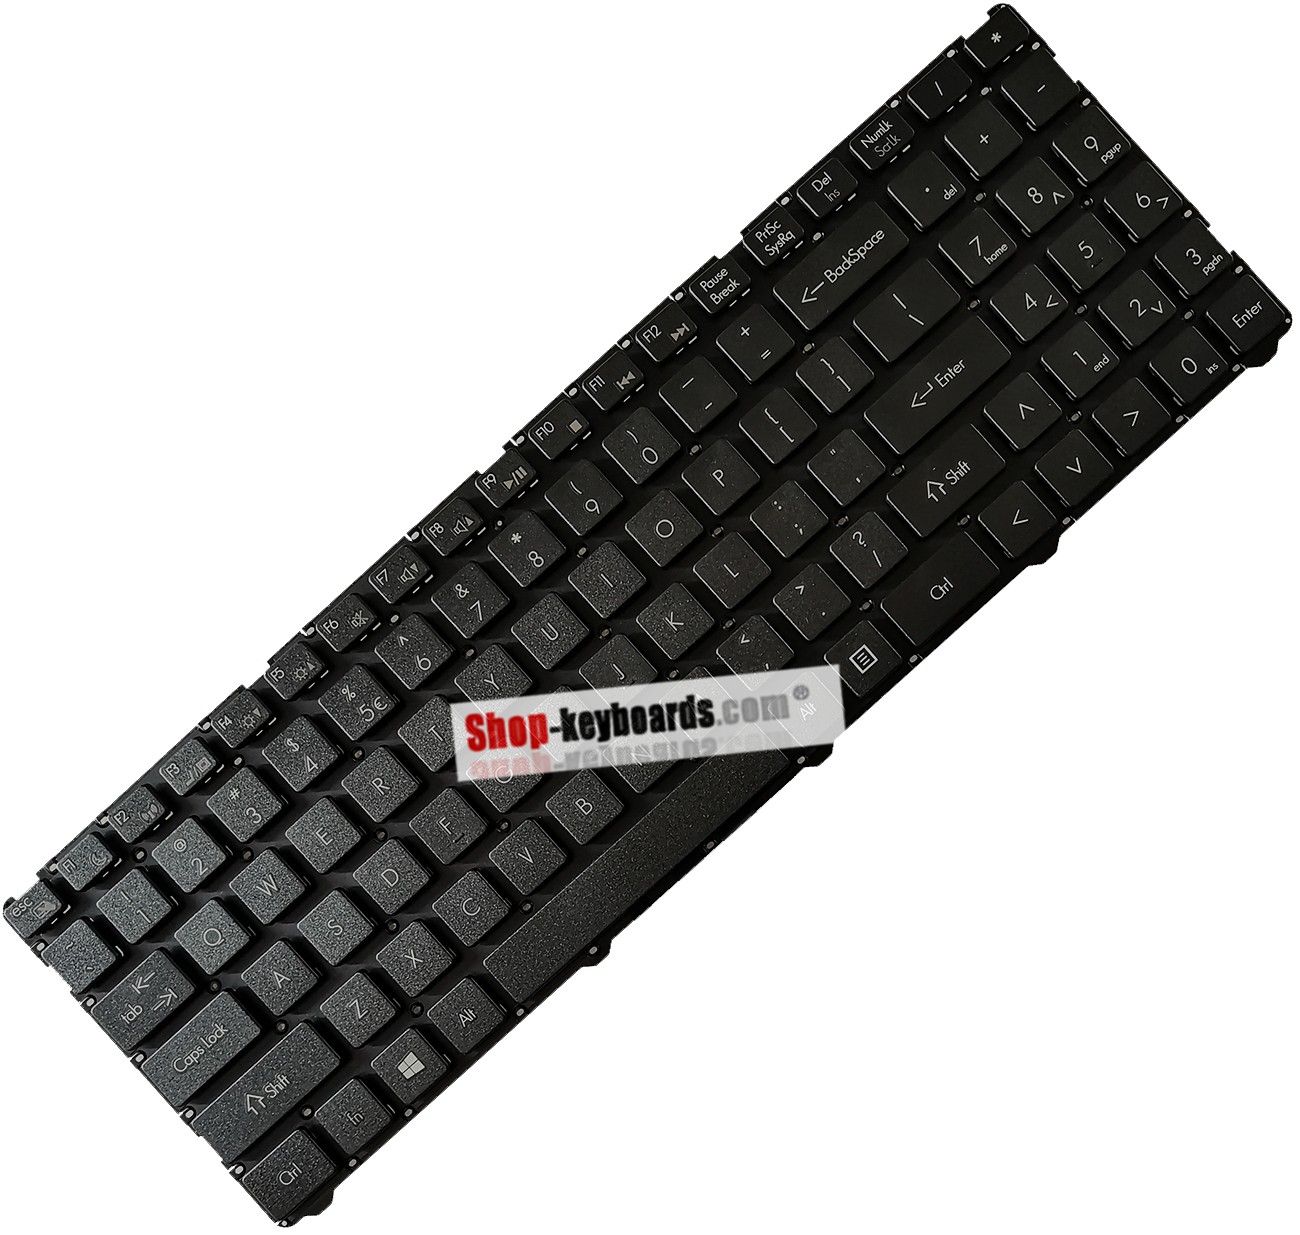 LG 15UD470-KX5UE Keyboard replacement